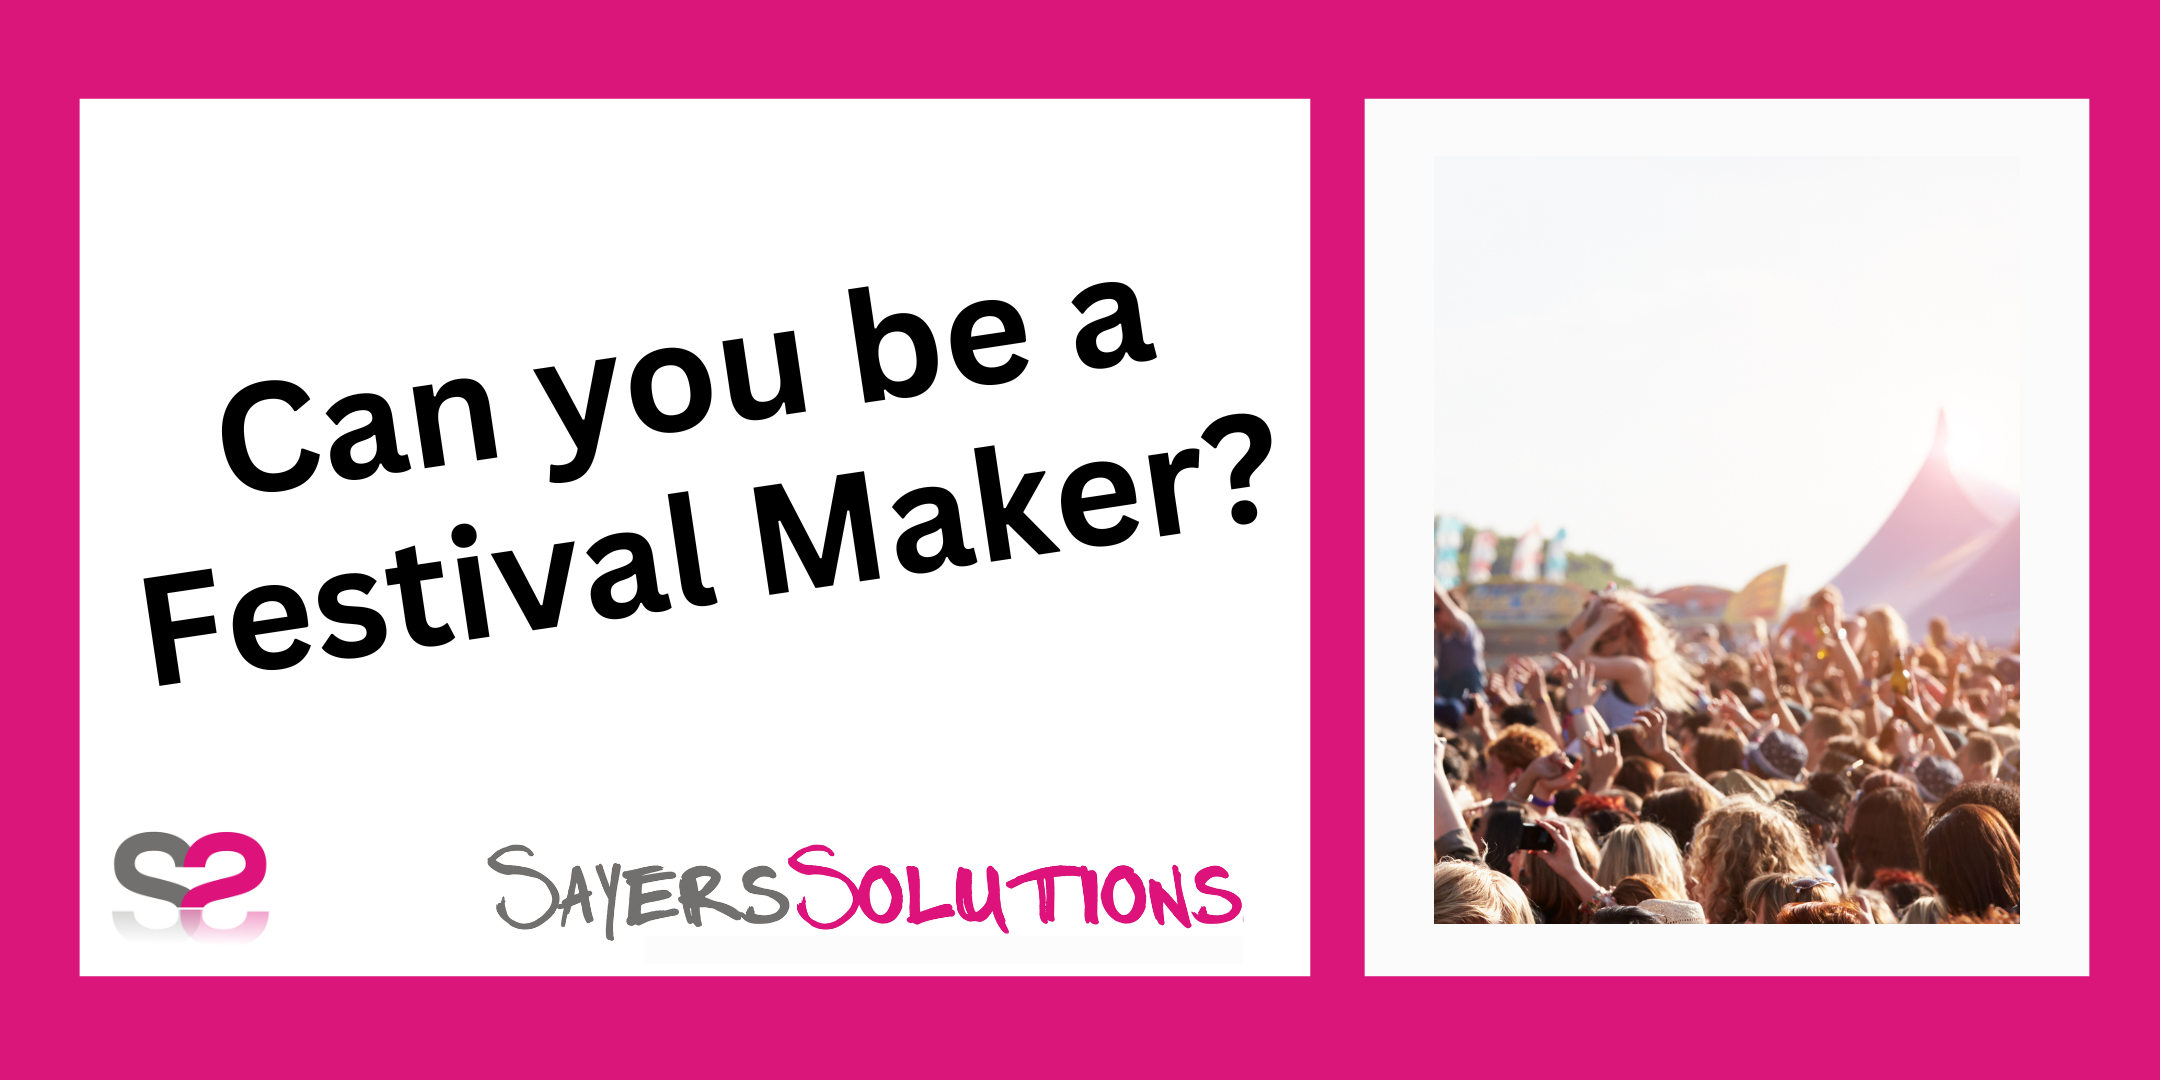 Can you be a Festival Maker?